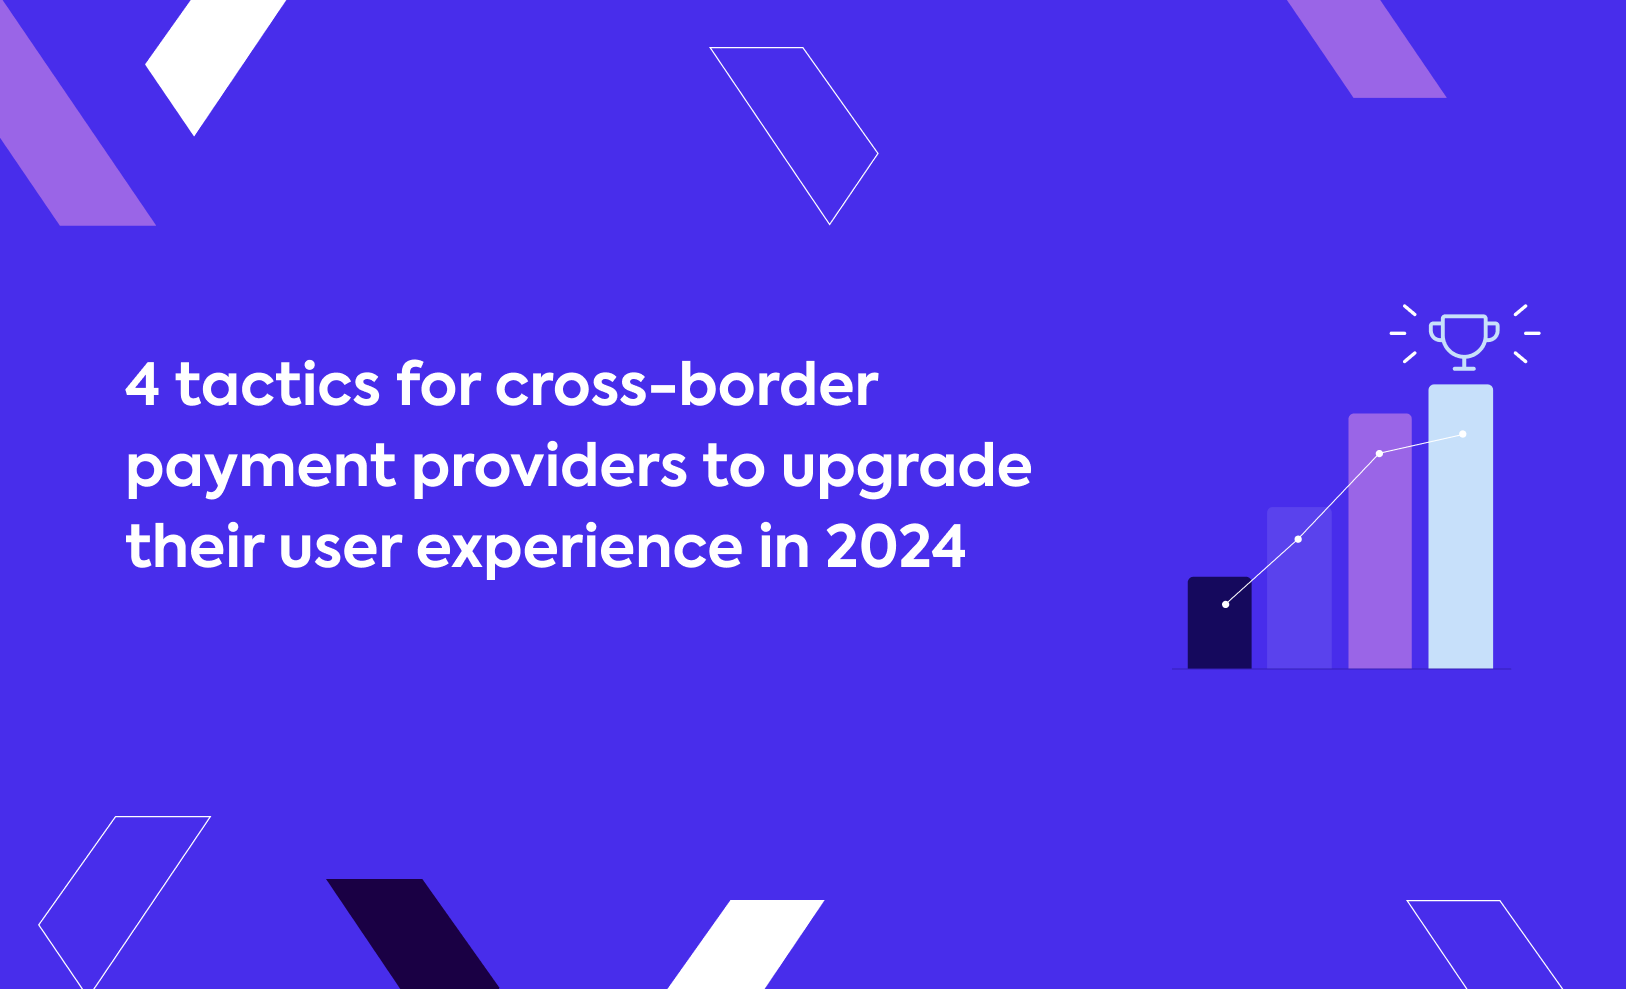 4 tactics for cross-border payment providers to upgrade their user experience in 2024